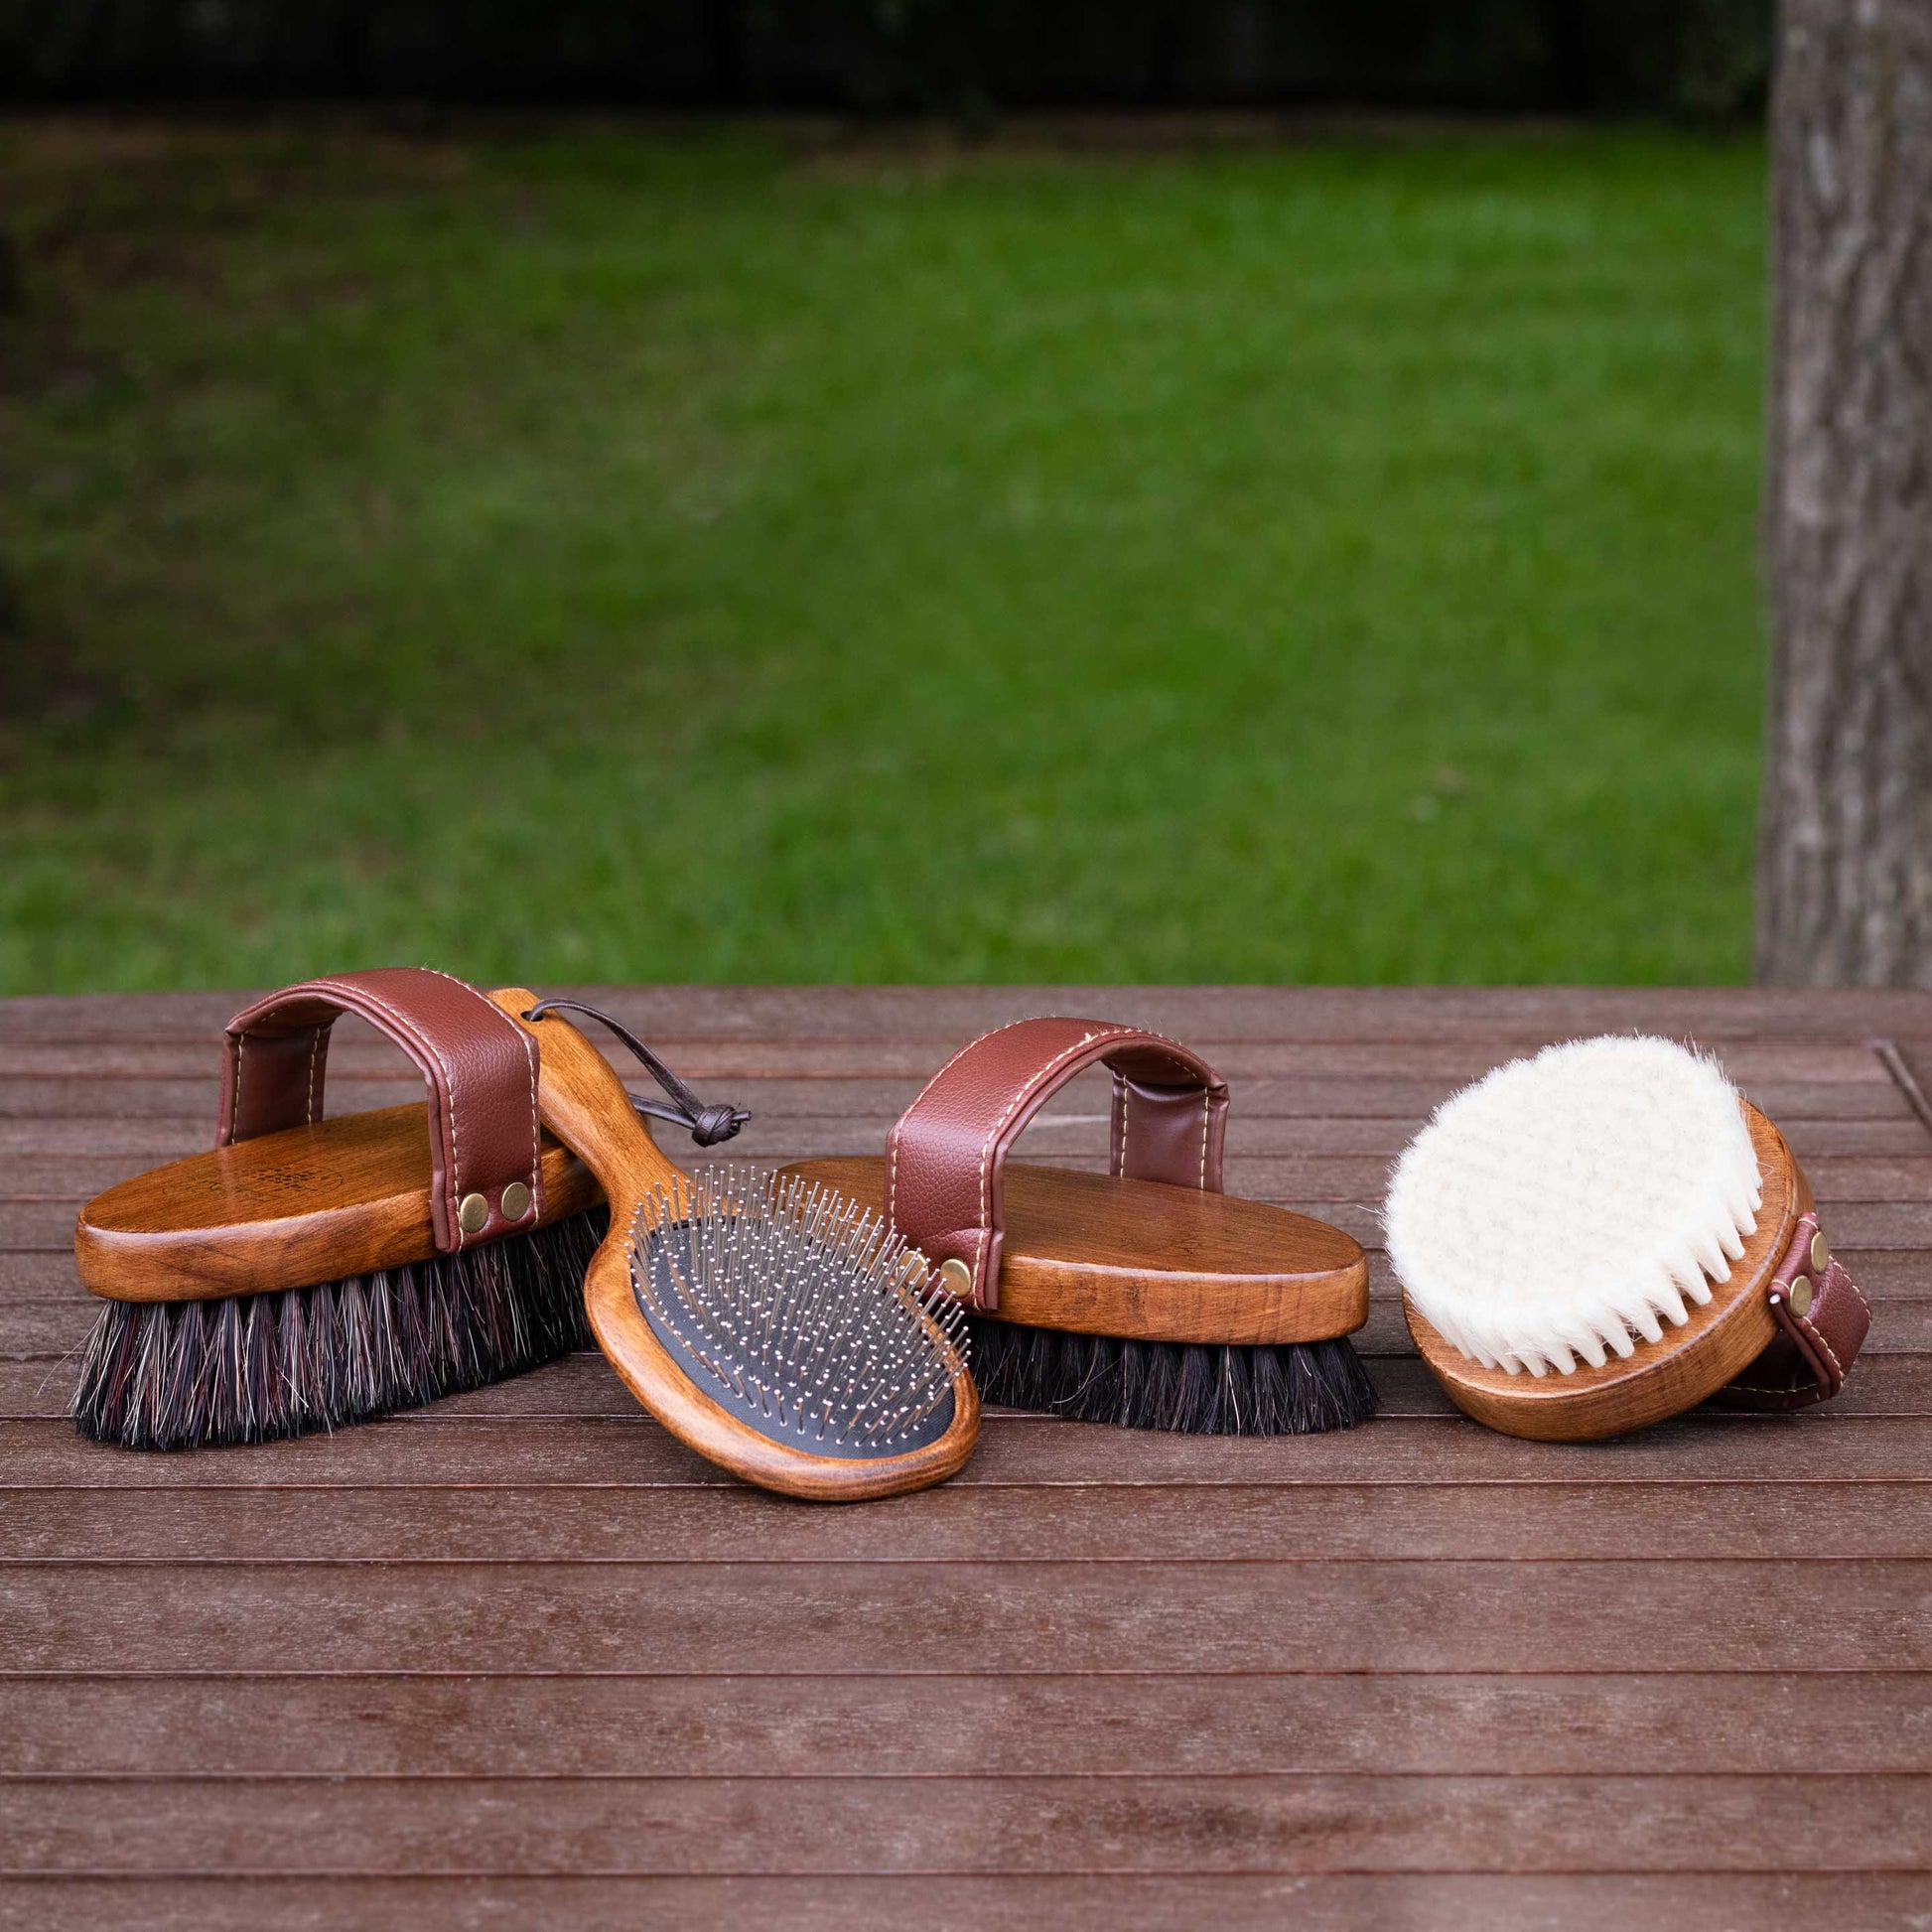 The four brushes included in the Hairy Pony Brush Kit